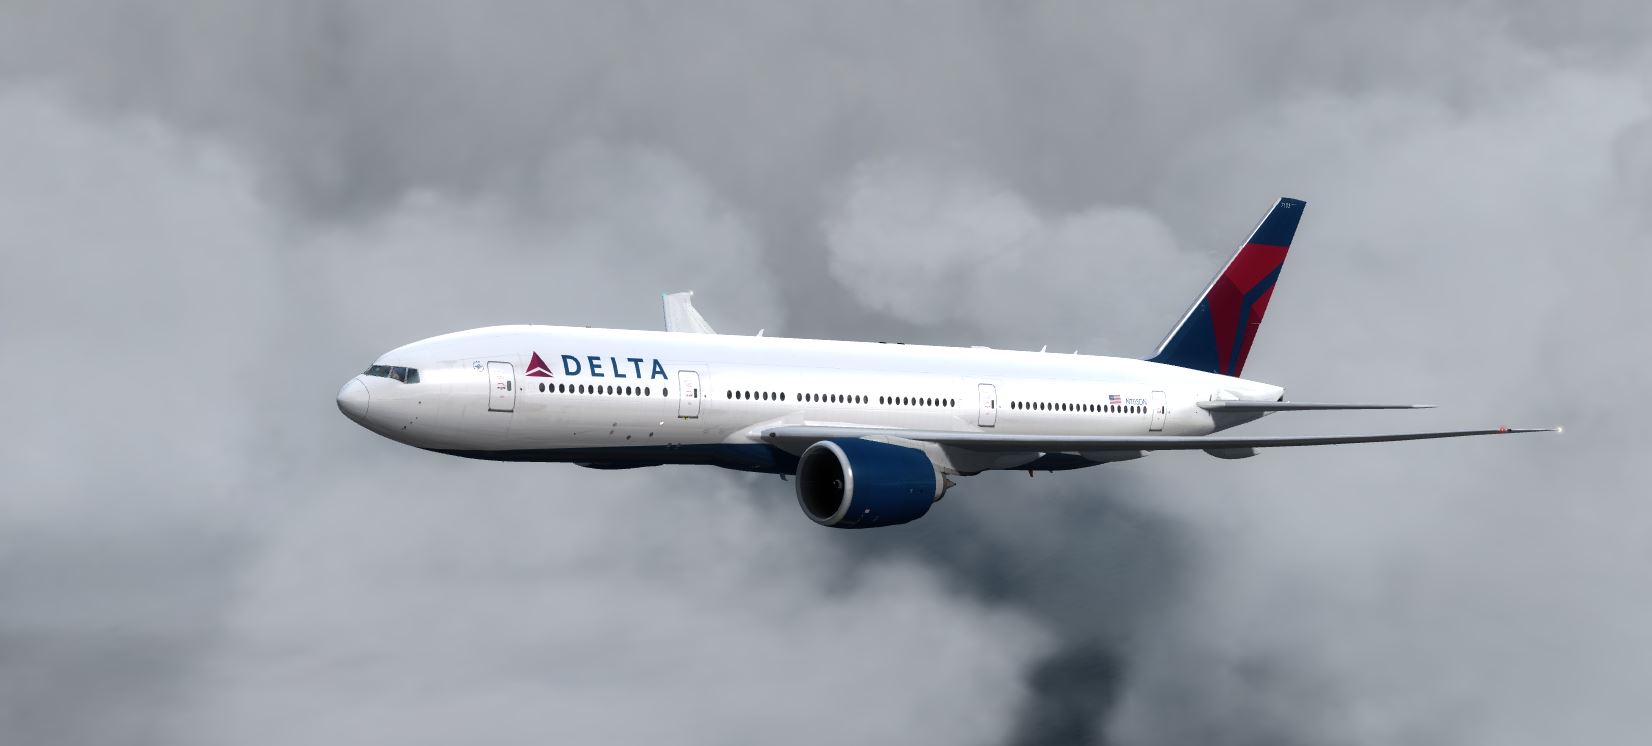 B777-200 Delta Airlines Standard Livery-5353 